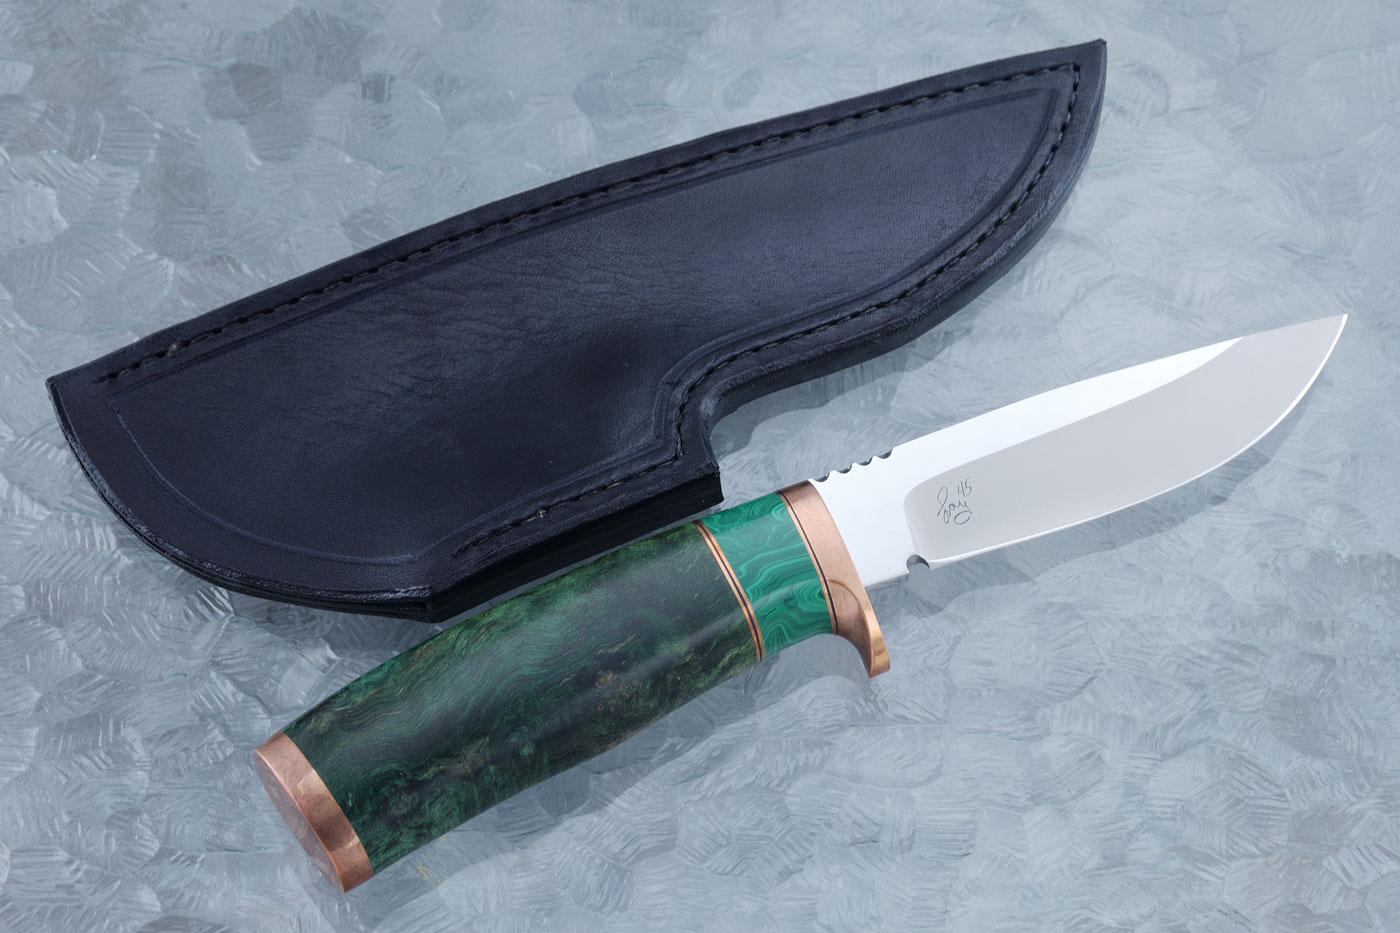 Canadian Hunter with Maple Burl and Malachite (45th Anniversary Knife)